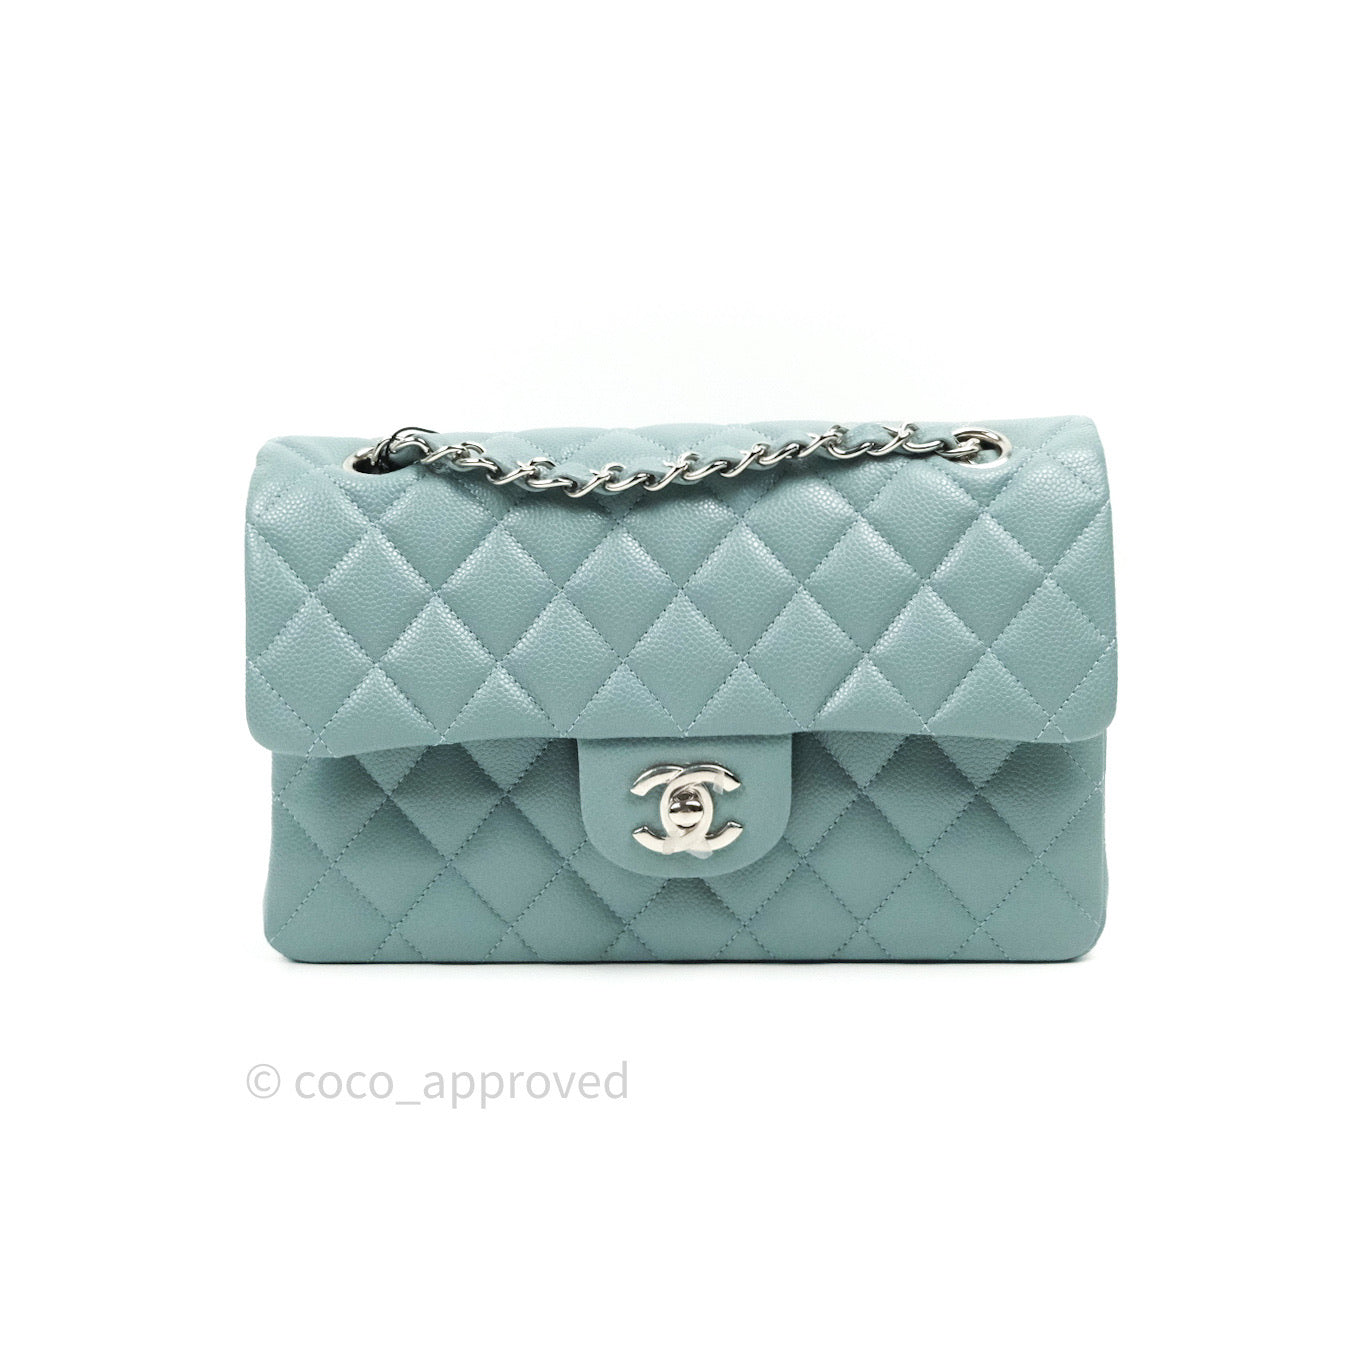 BN AUTHENTIC CHANEL CLASSIC SMALL DOUBLE FLAP IN LIGHT BLUE CAVIAR LEATHER  WITH SHINY GOLD HARDWARE – Mi Reyna Fashion Lover